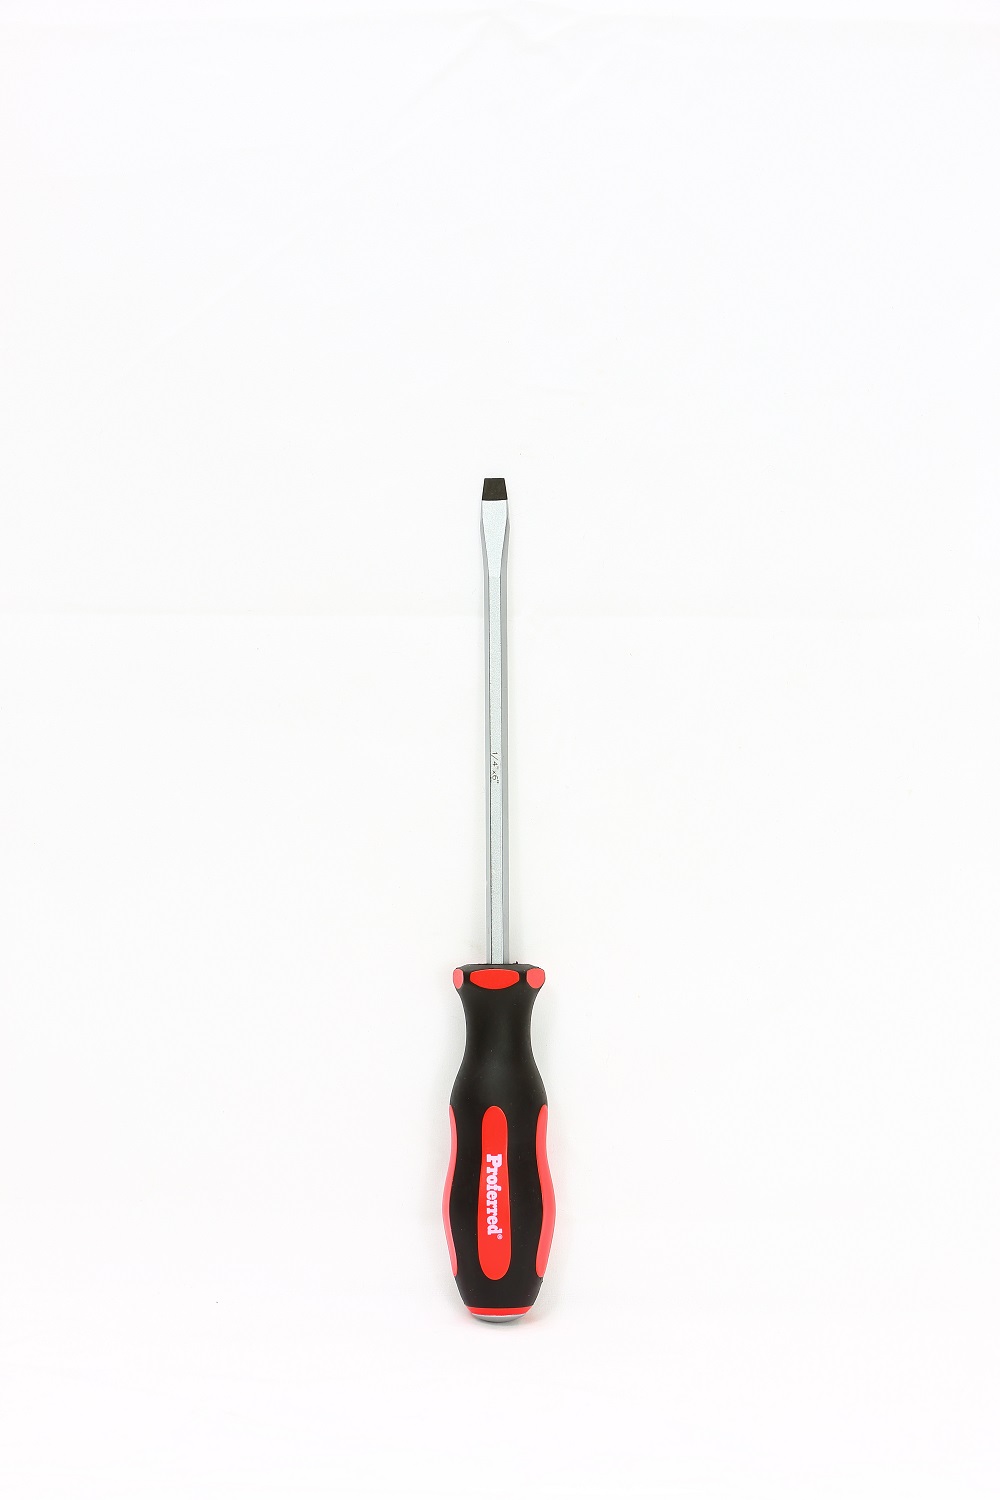 PROFERRED GO-THRU SCREWDRIVER SLOTTED 1/4''X6'' RED HANDLE 